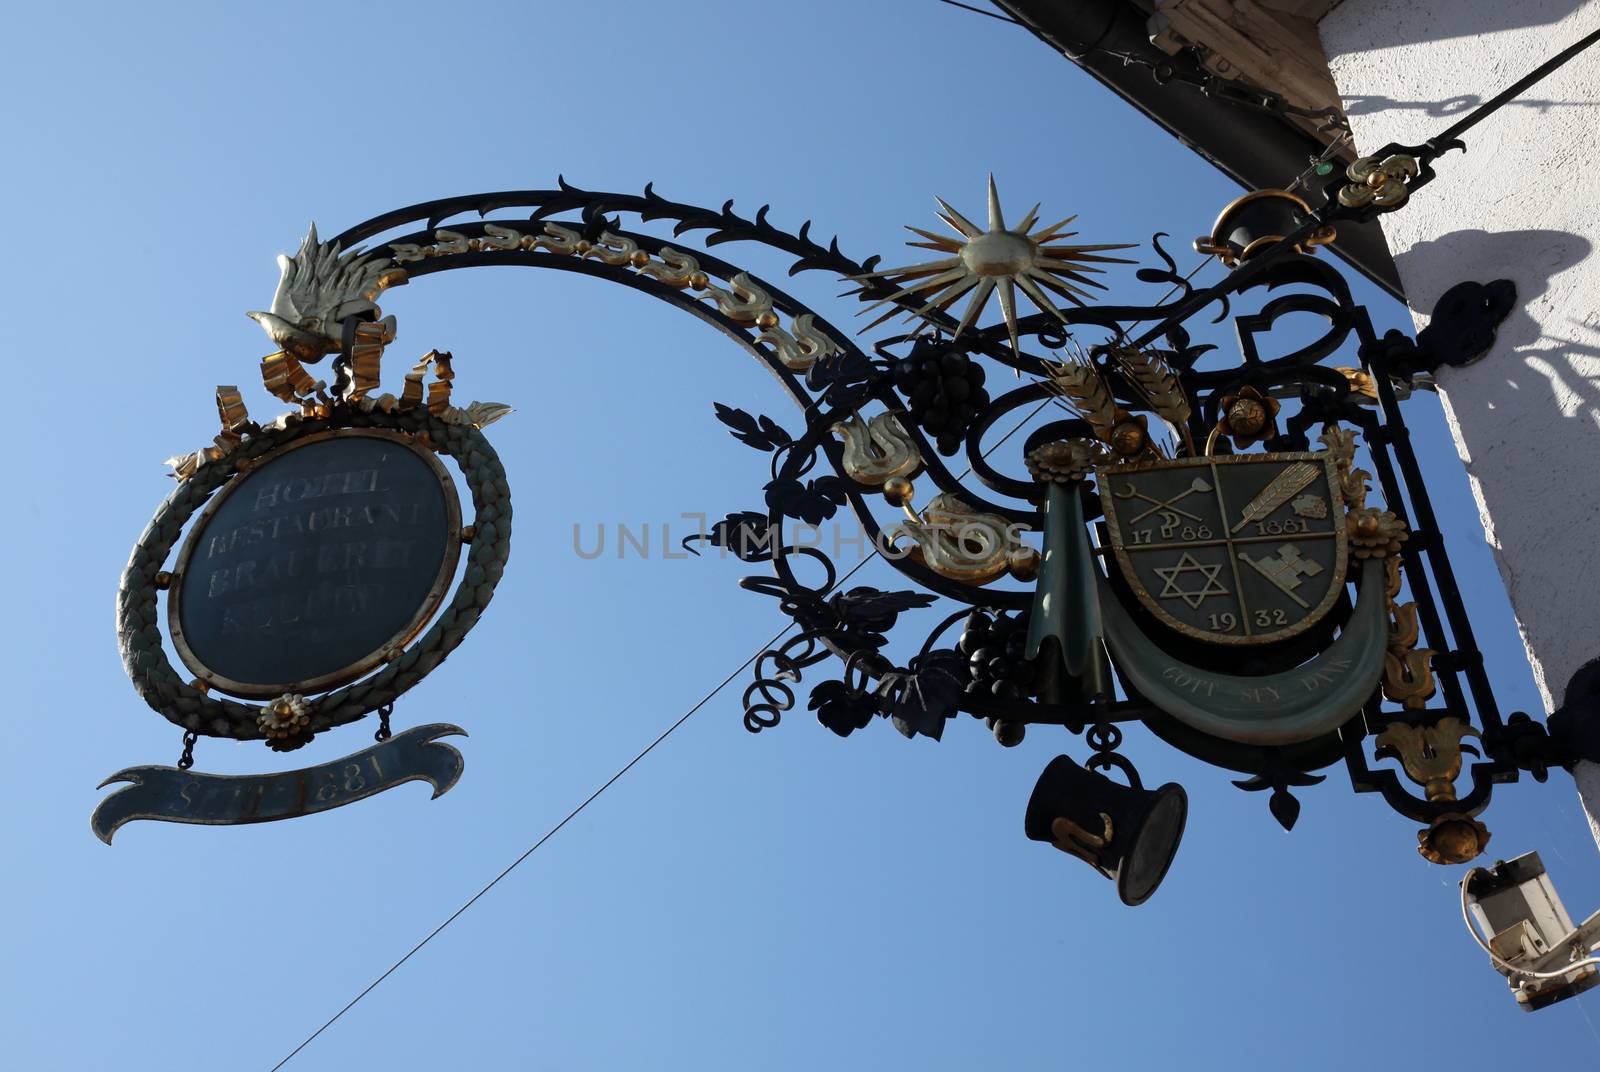 Old sign for an restaurant in the old town of Miltenberg, Germany